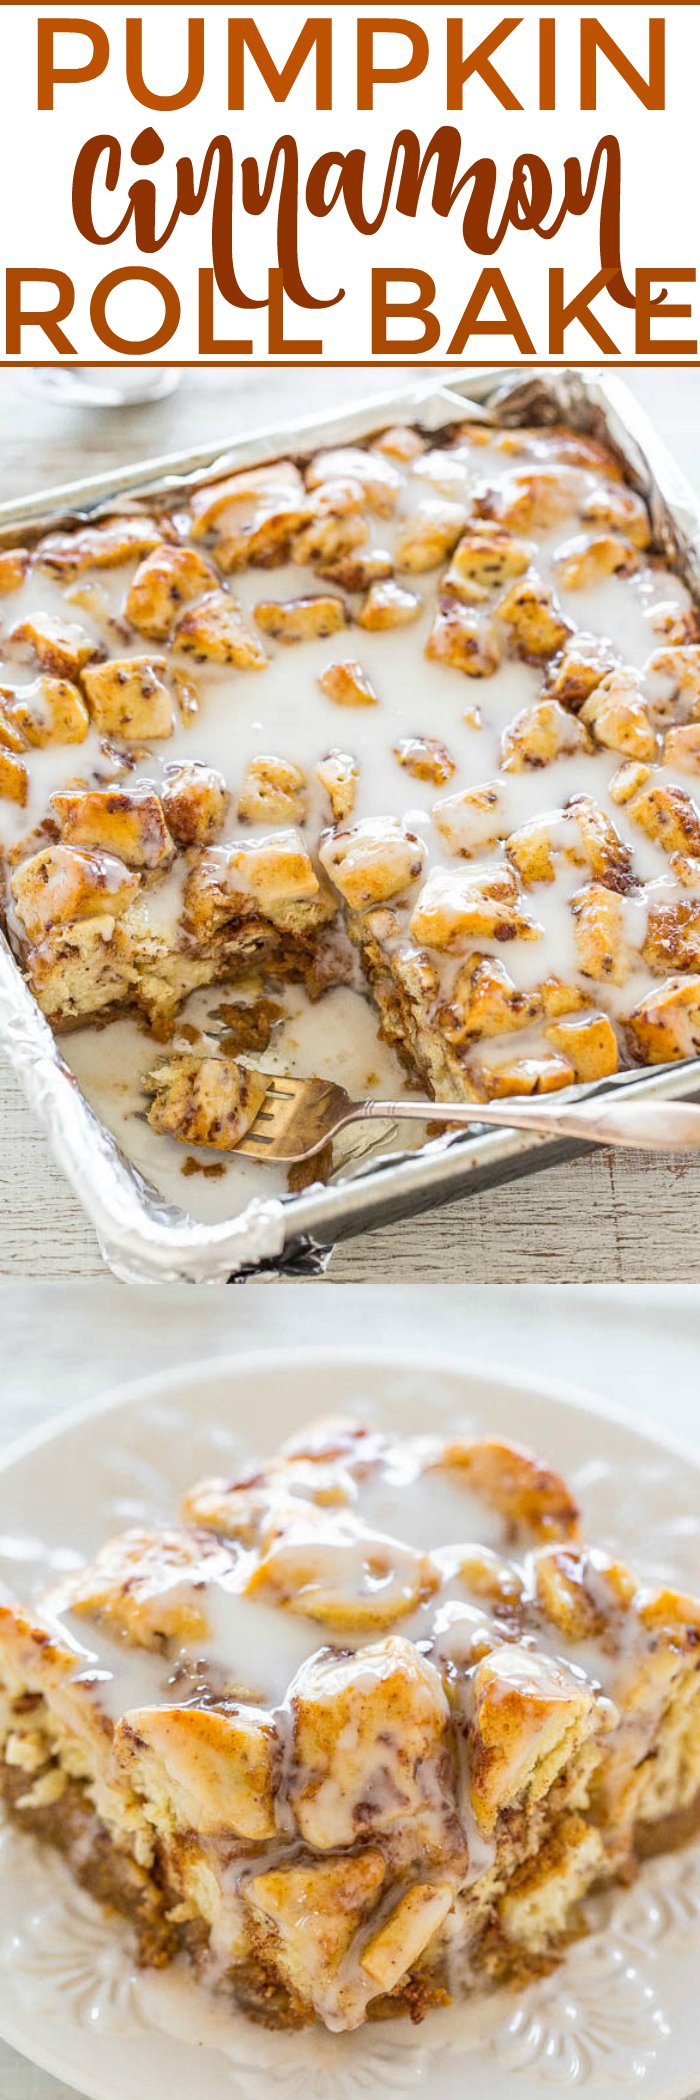 Pumpkin Cinnamon Roll Bake - Every bite tastes like the super SOFT, gooey CENTER of a cinnamon roll!! Spiked with pumpkin and flooded with icing, this EASY recipe is an automatic WINNER!!